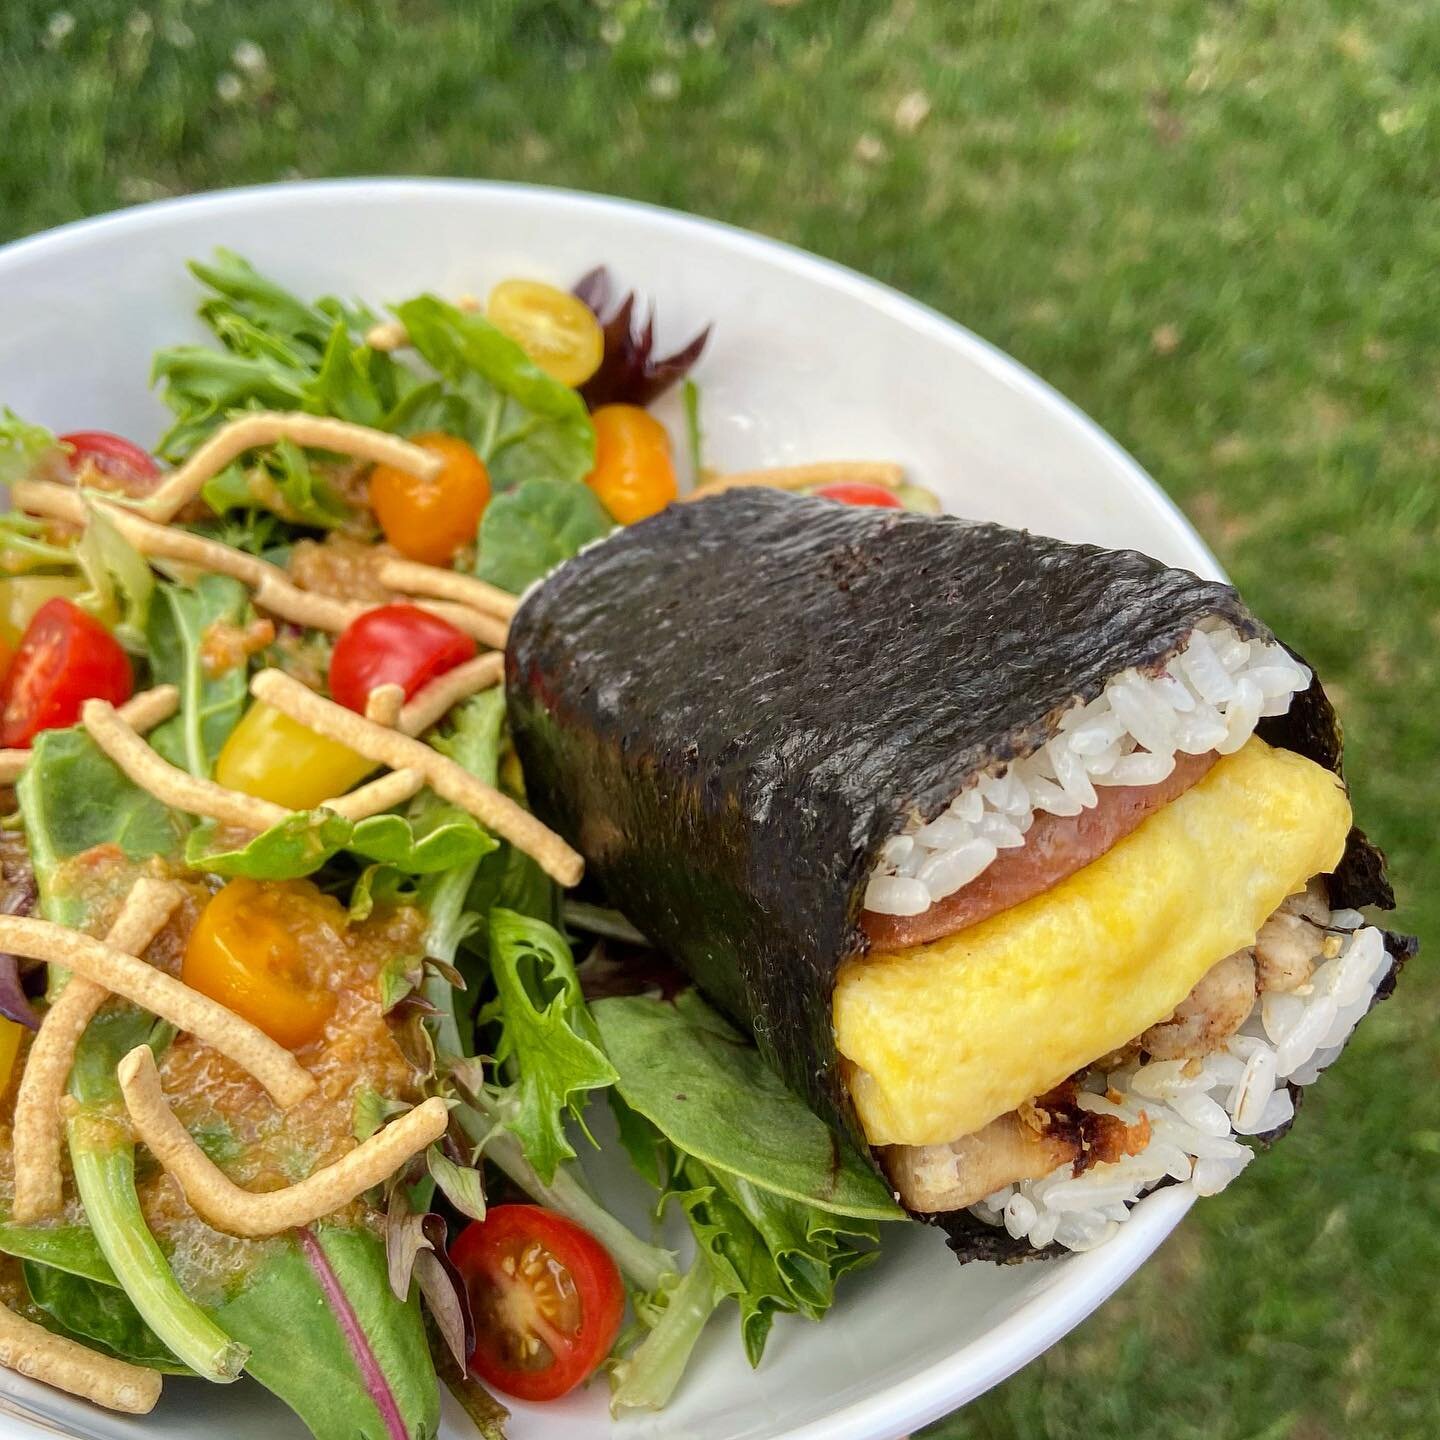 MUSUBI 🍙 A popular Hawaiian food composed of a slice of grilled Spam sandwiched either in between or on top of a block of rice, wrapped together with nori (seaweed).
⬇️
My hubby introduced me to Musubi recently so I bought an easy-mold off Amazon an